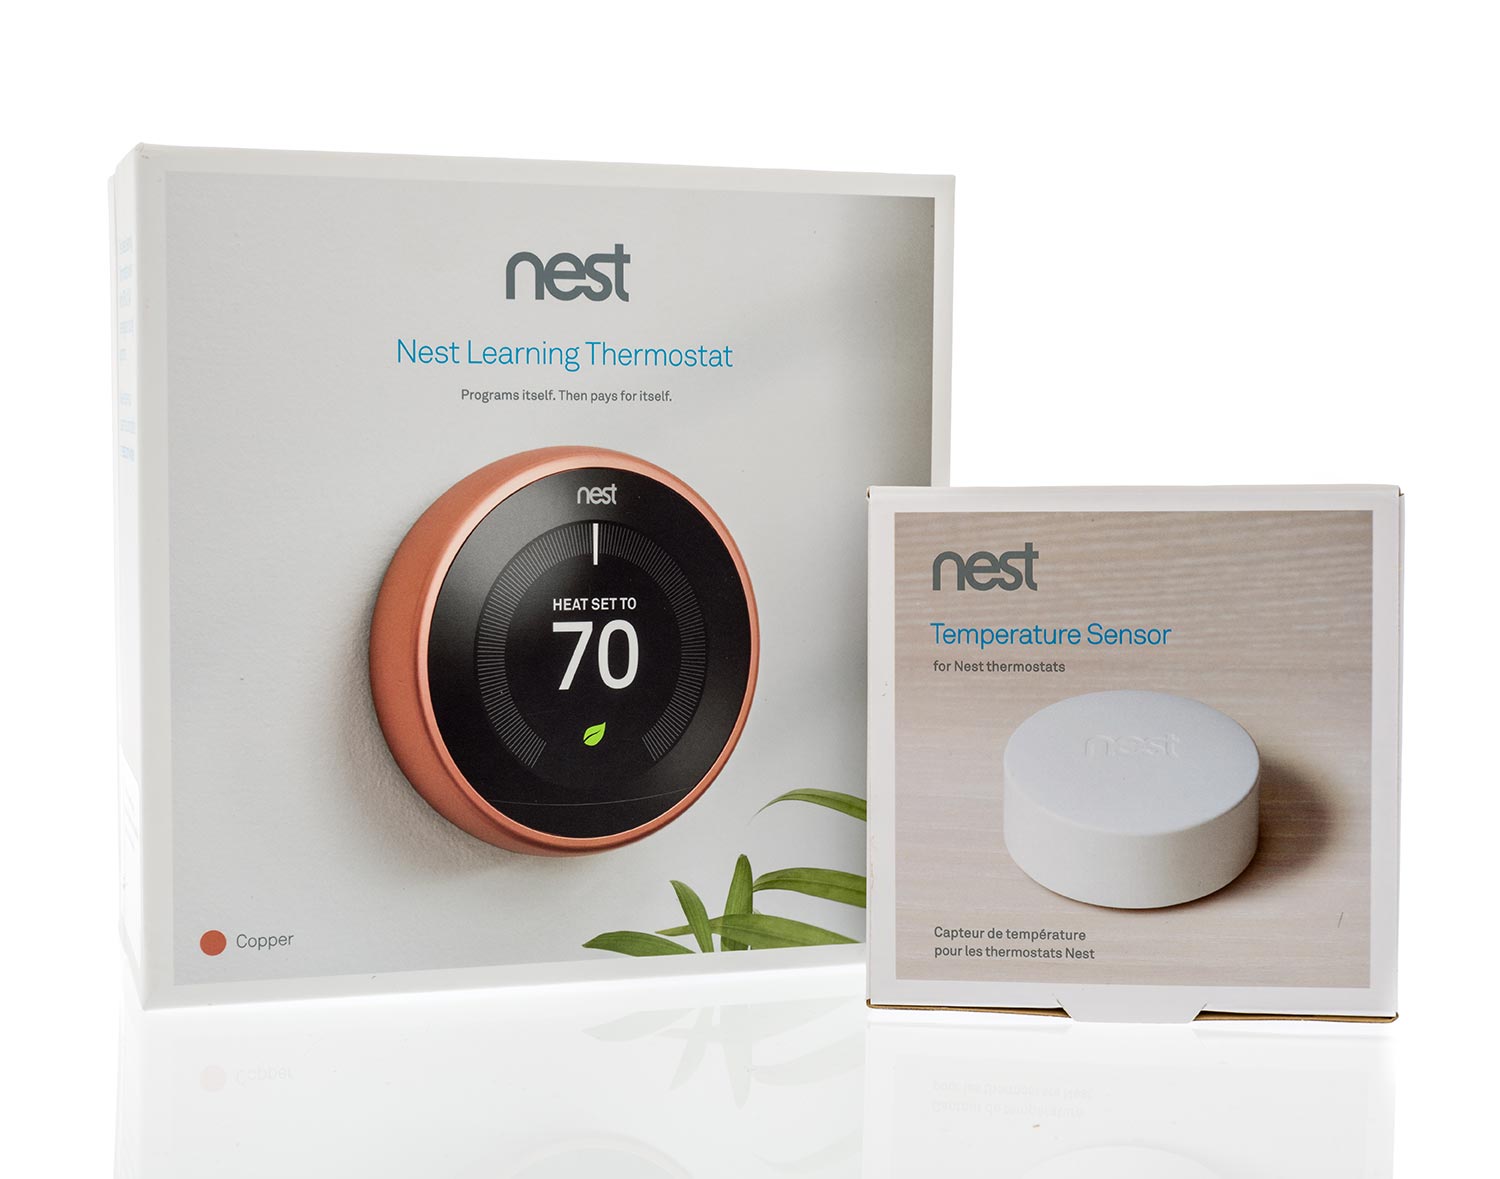 A package of Google Nest learning thermostat and Nest temperature sensor